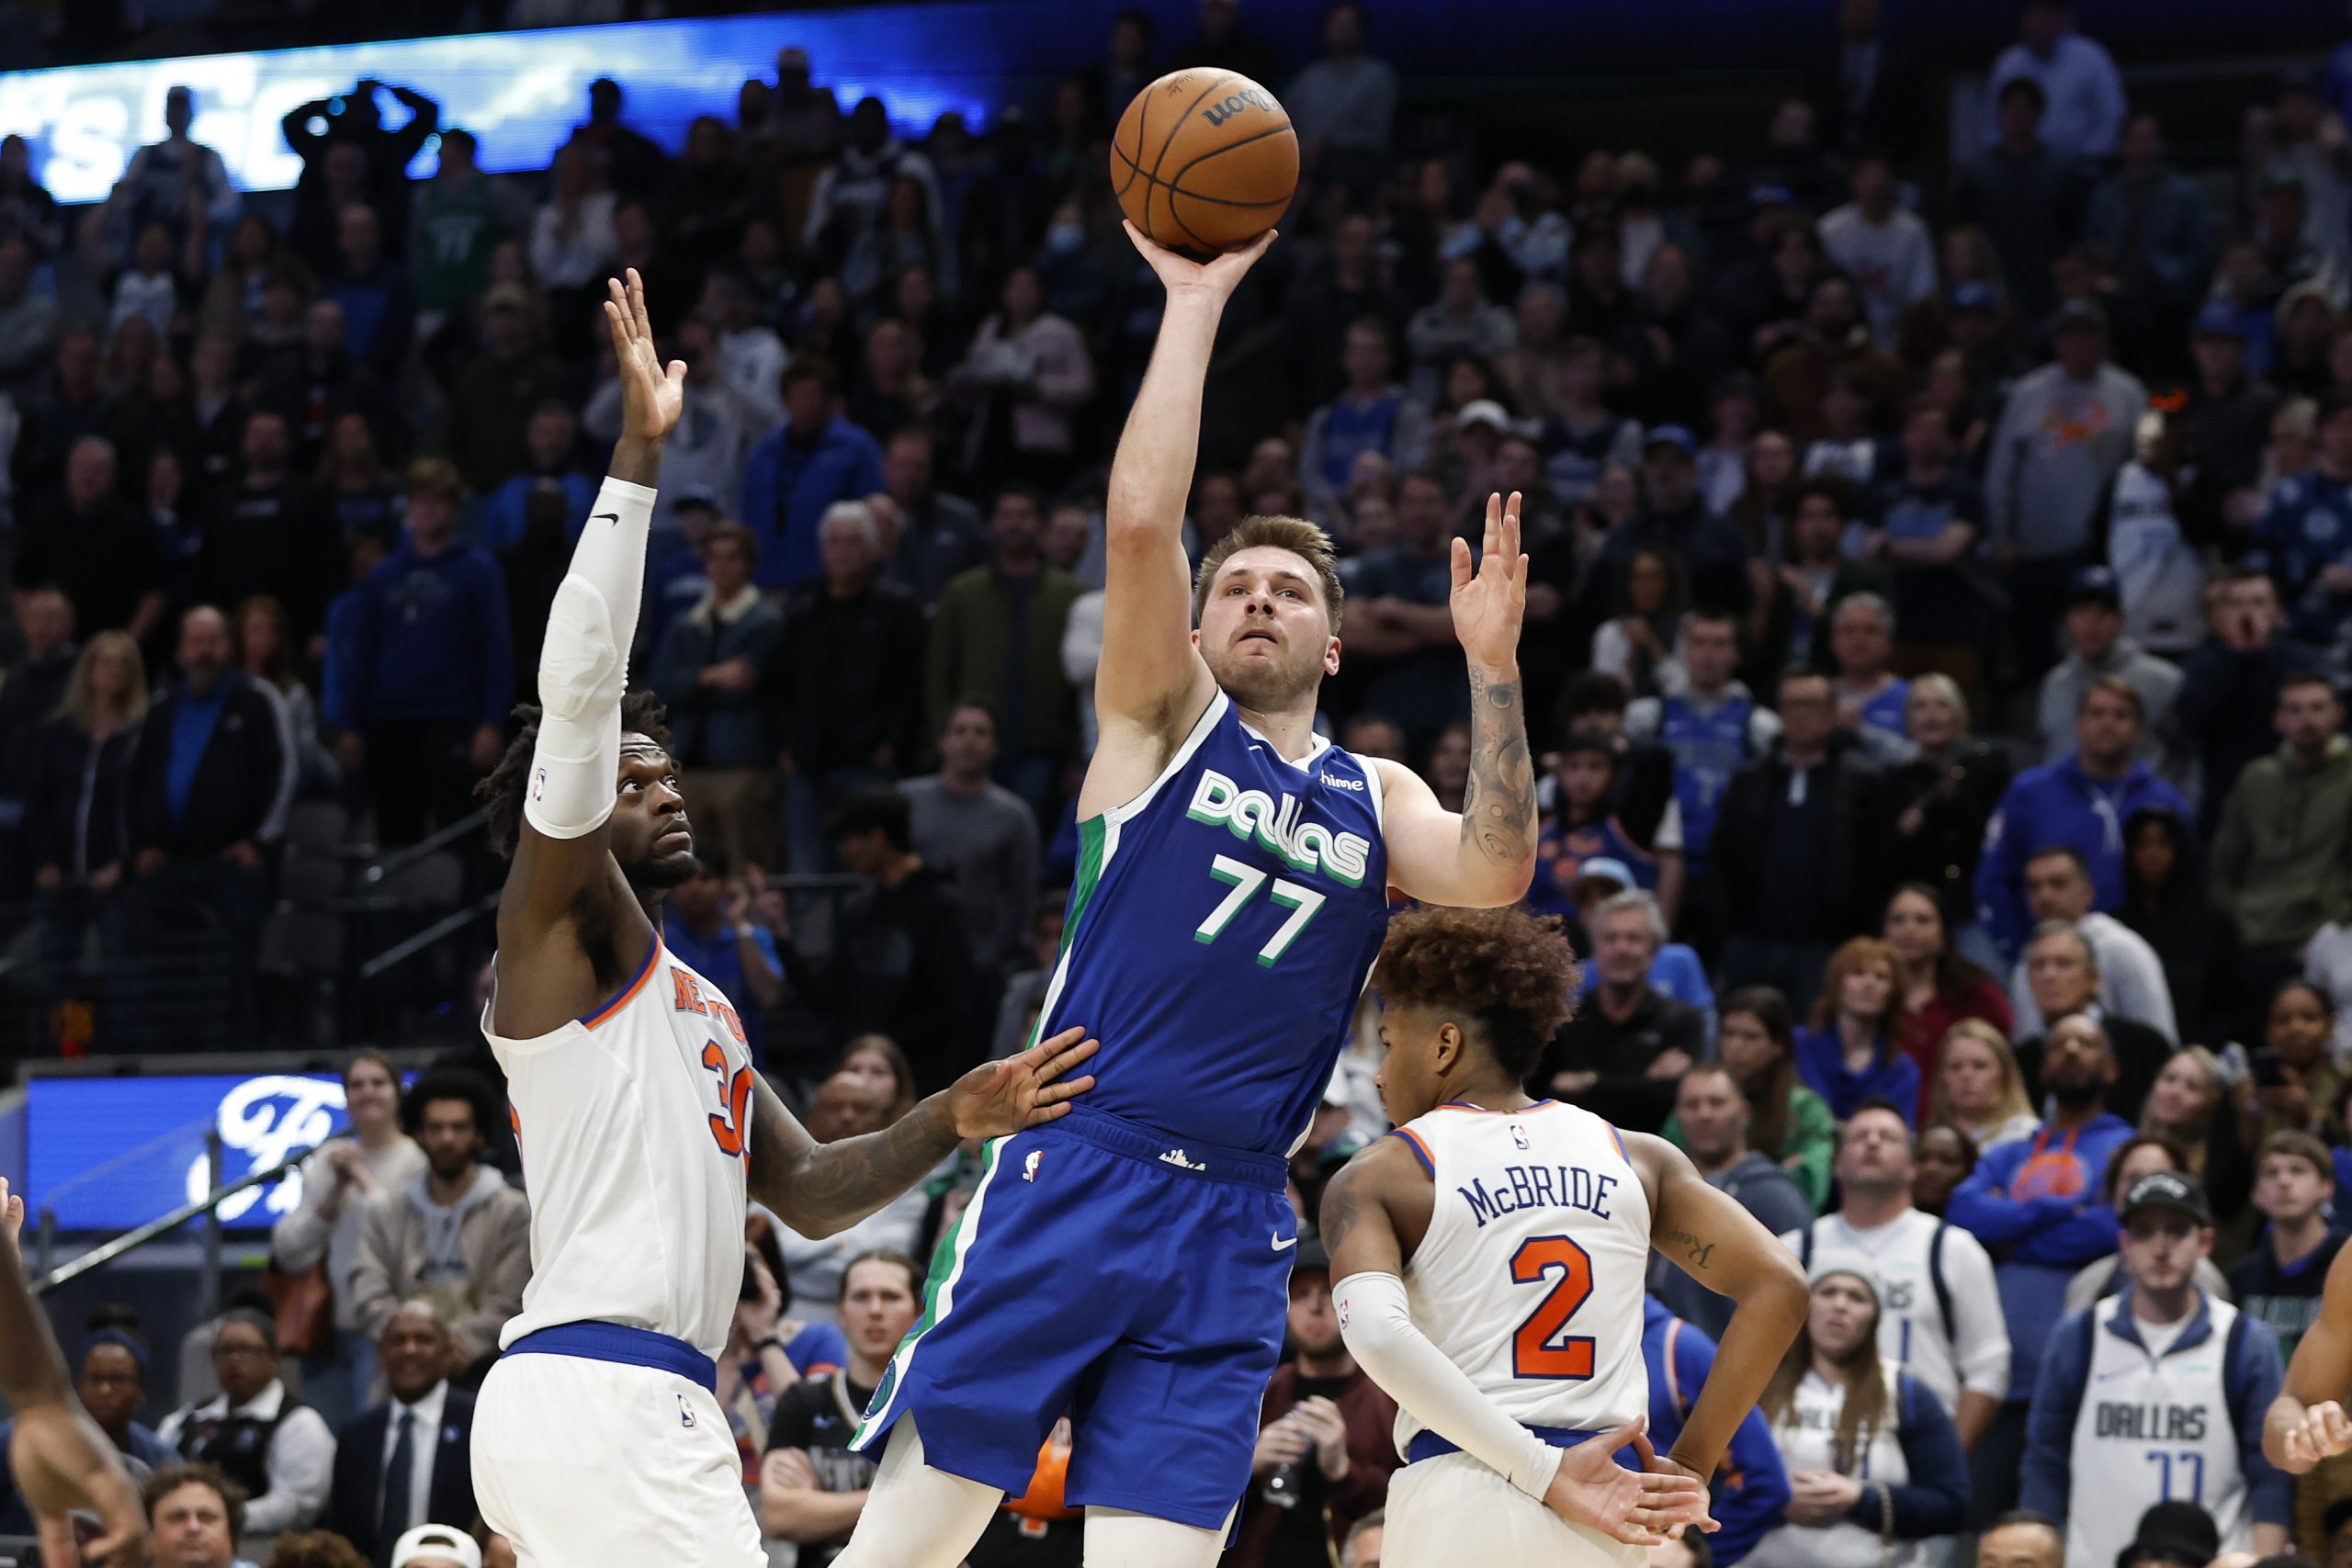 Luka Doncic is ‘Tired as Hell’ After Historic 60-Point Triple-Double Performance